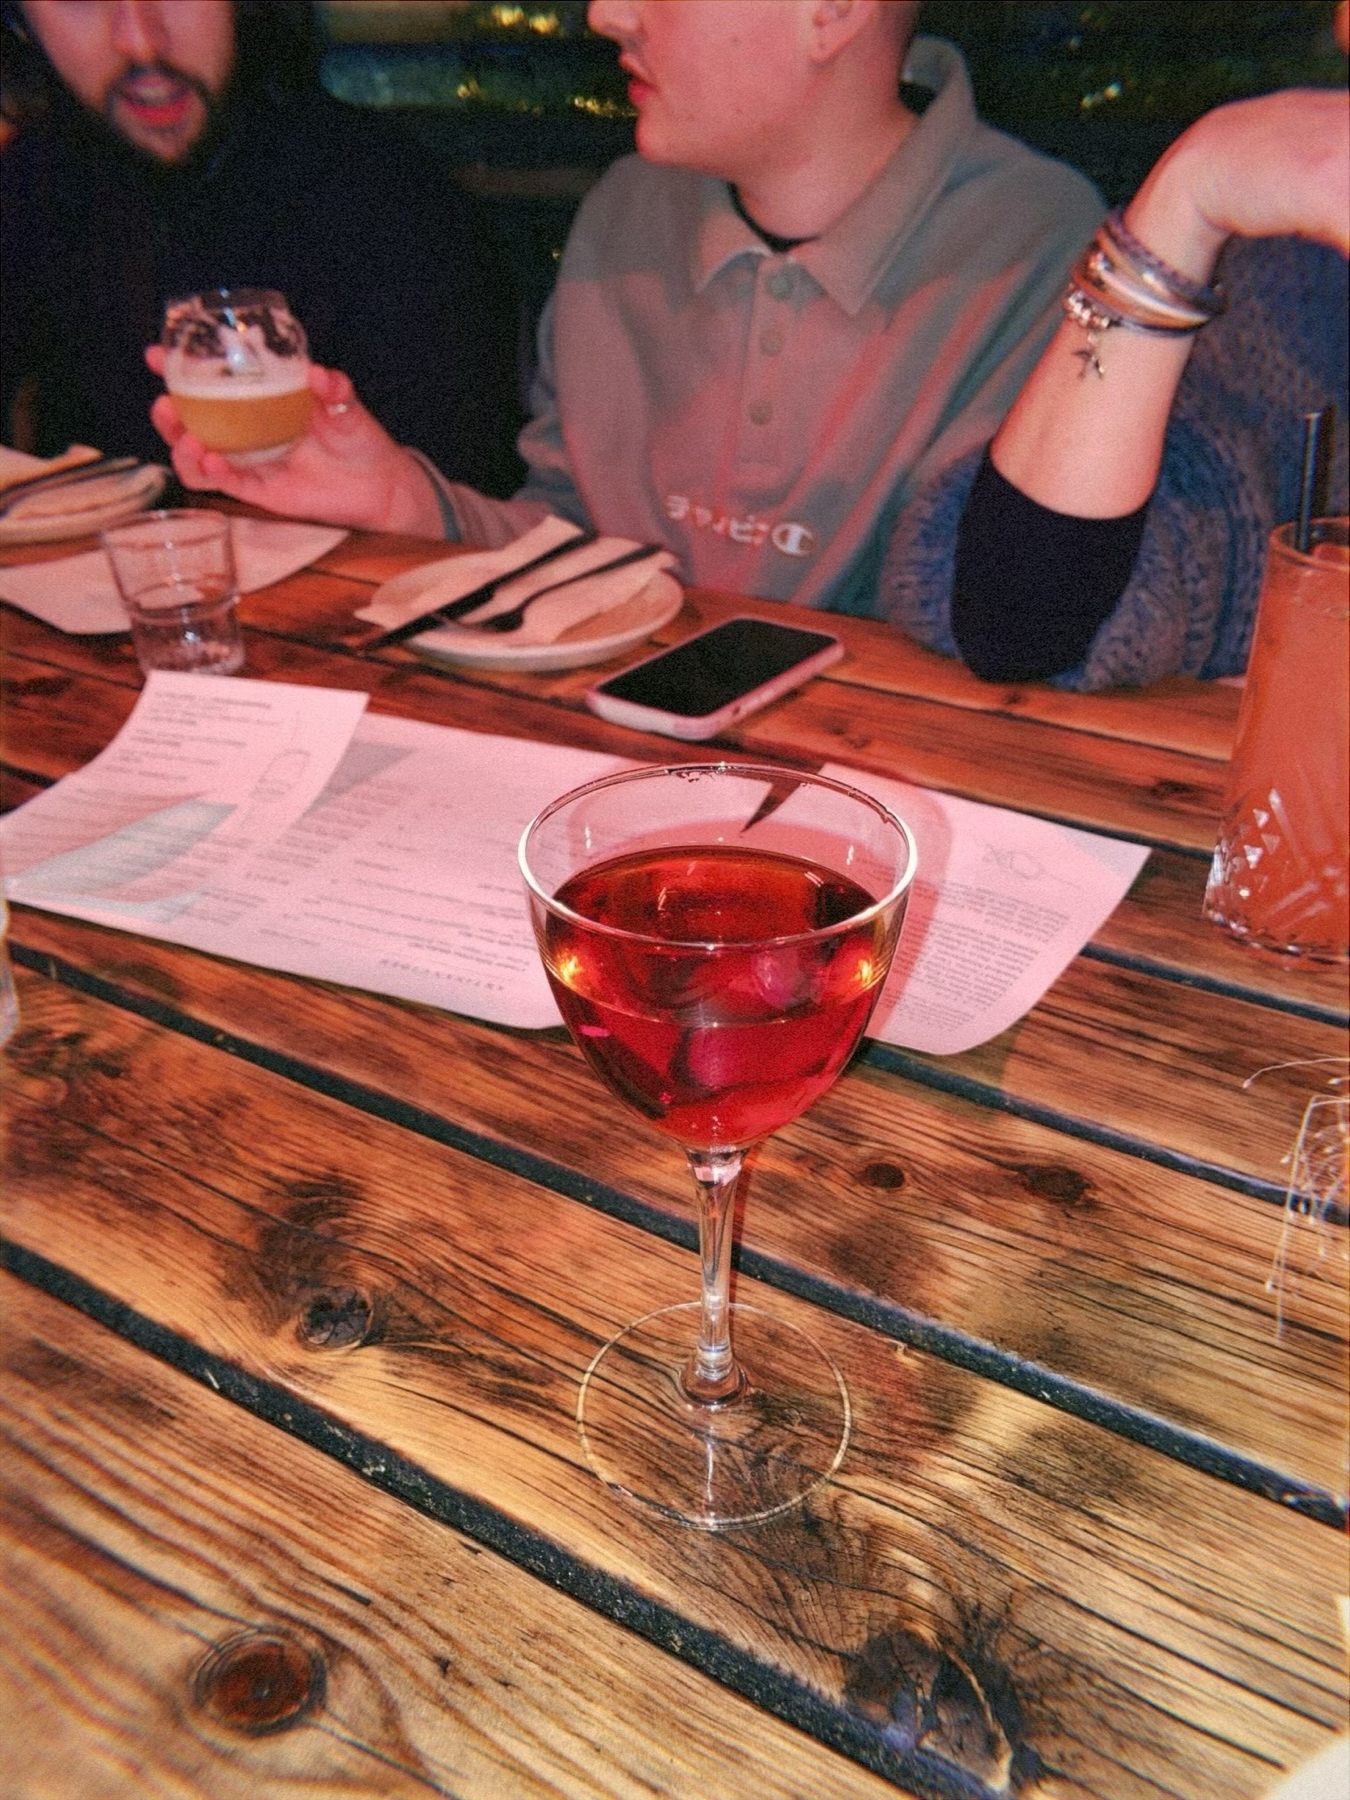 A cozy setting with people enjoying drinks around a wooden table, which features a glass of red beverage in the foreground, and various items such as more drinks, a smartphone, and a menu.